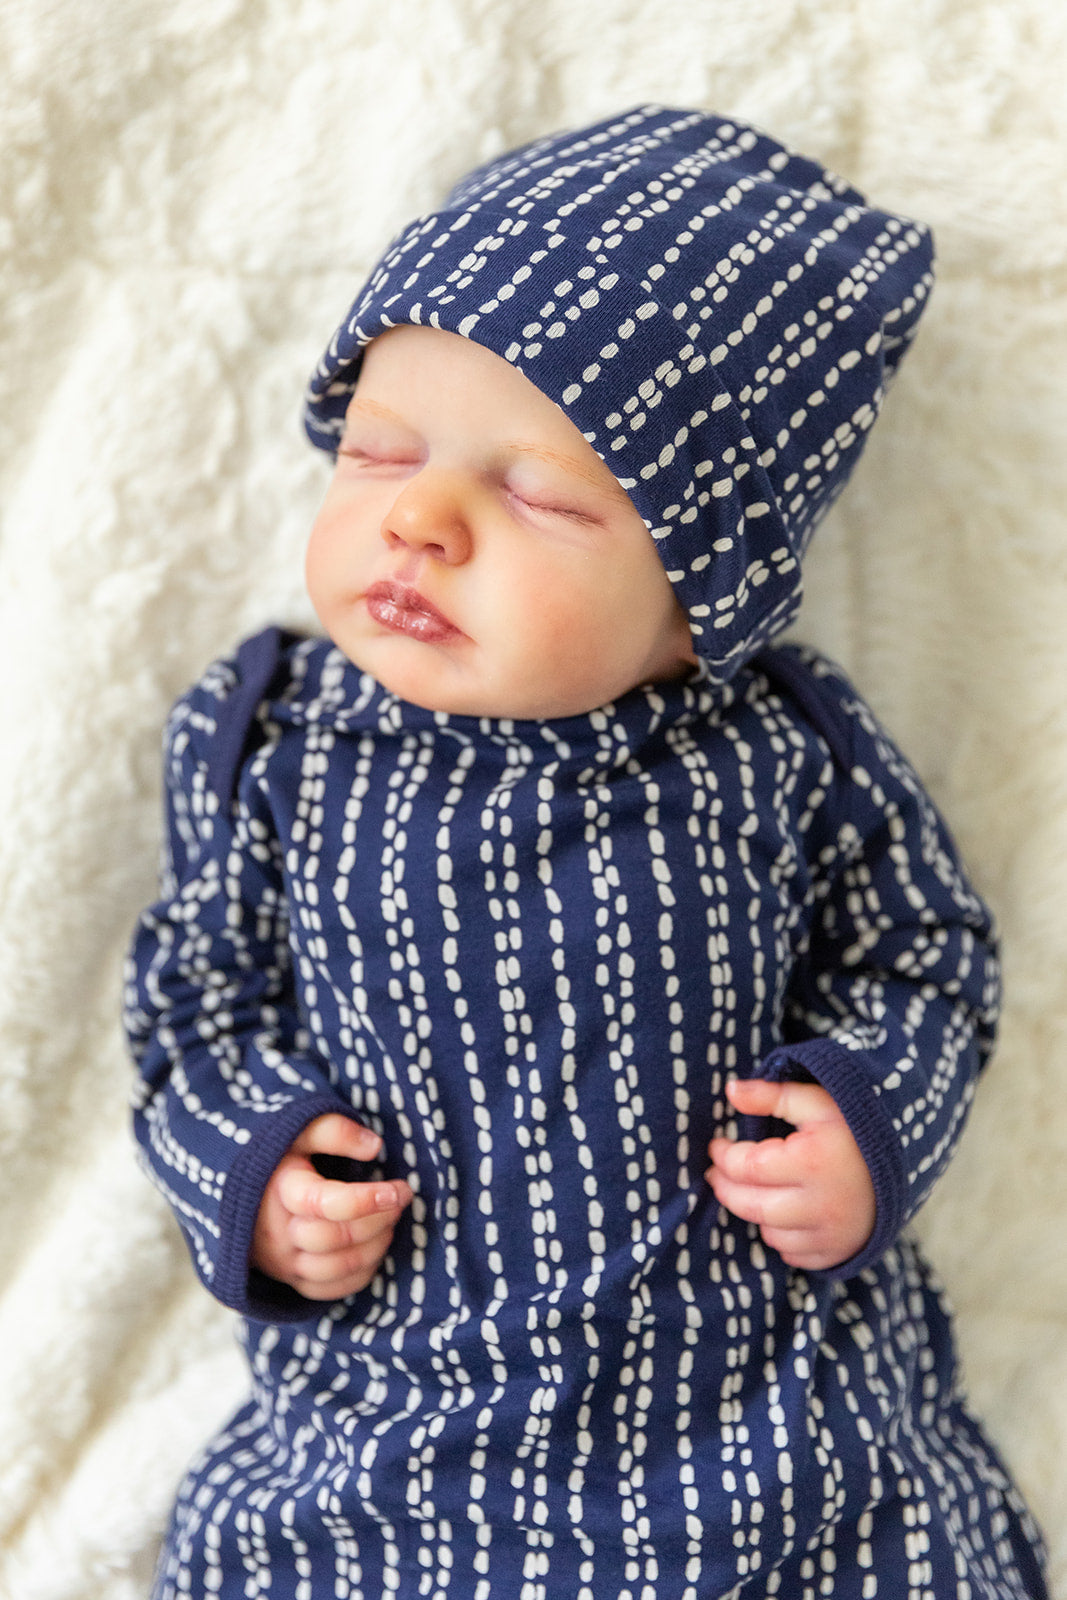 Luna Baby Coming Home Outfit and Matching Newborn Hat